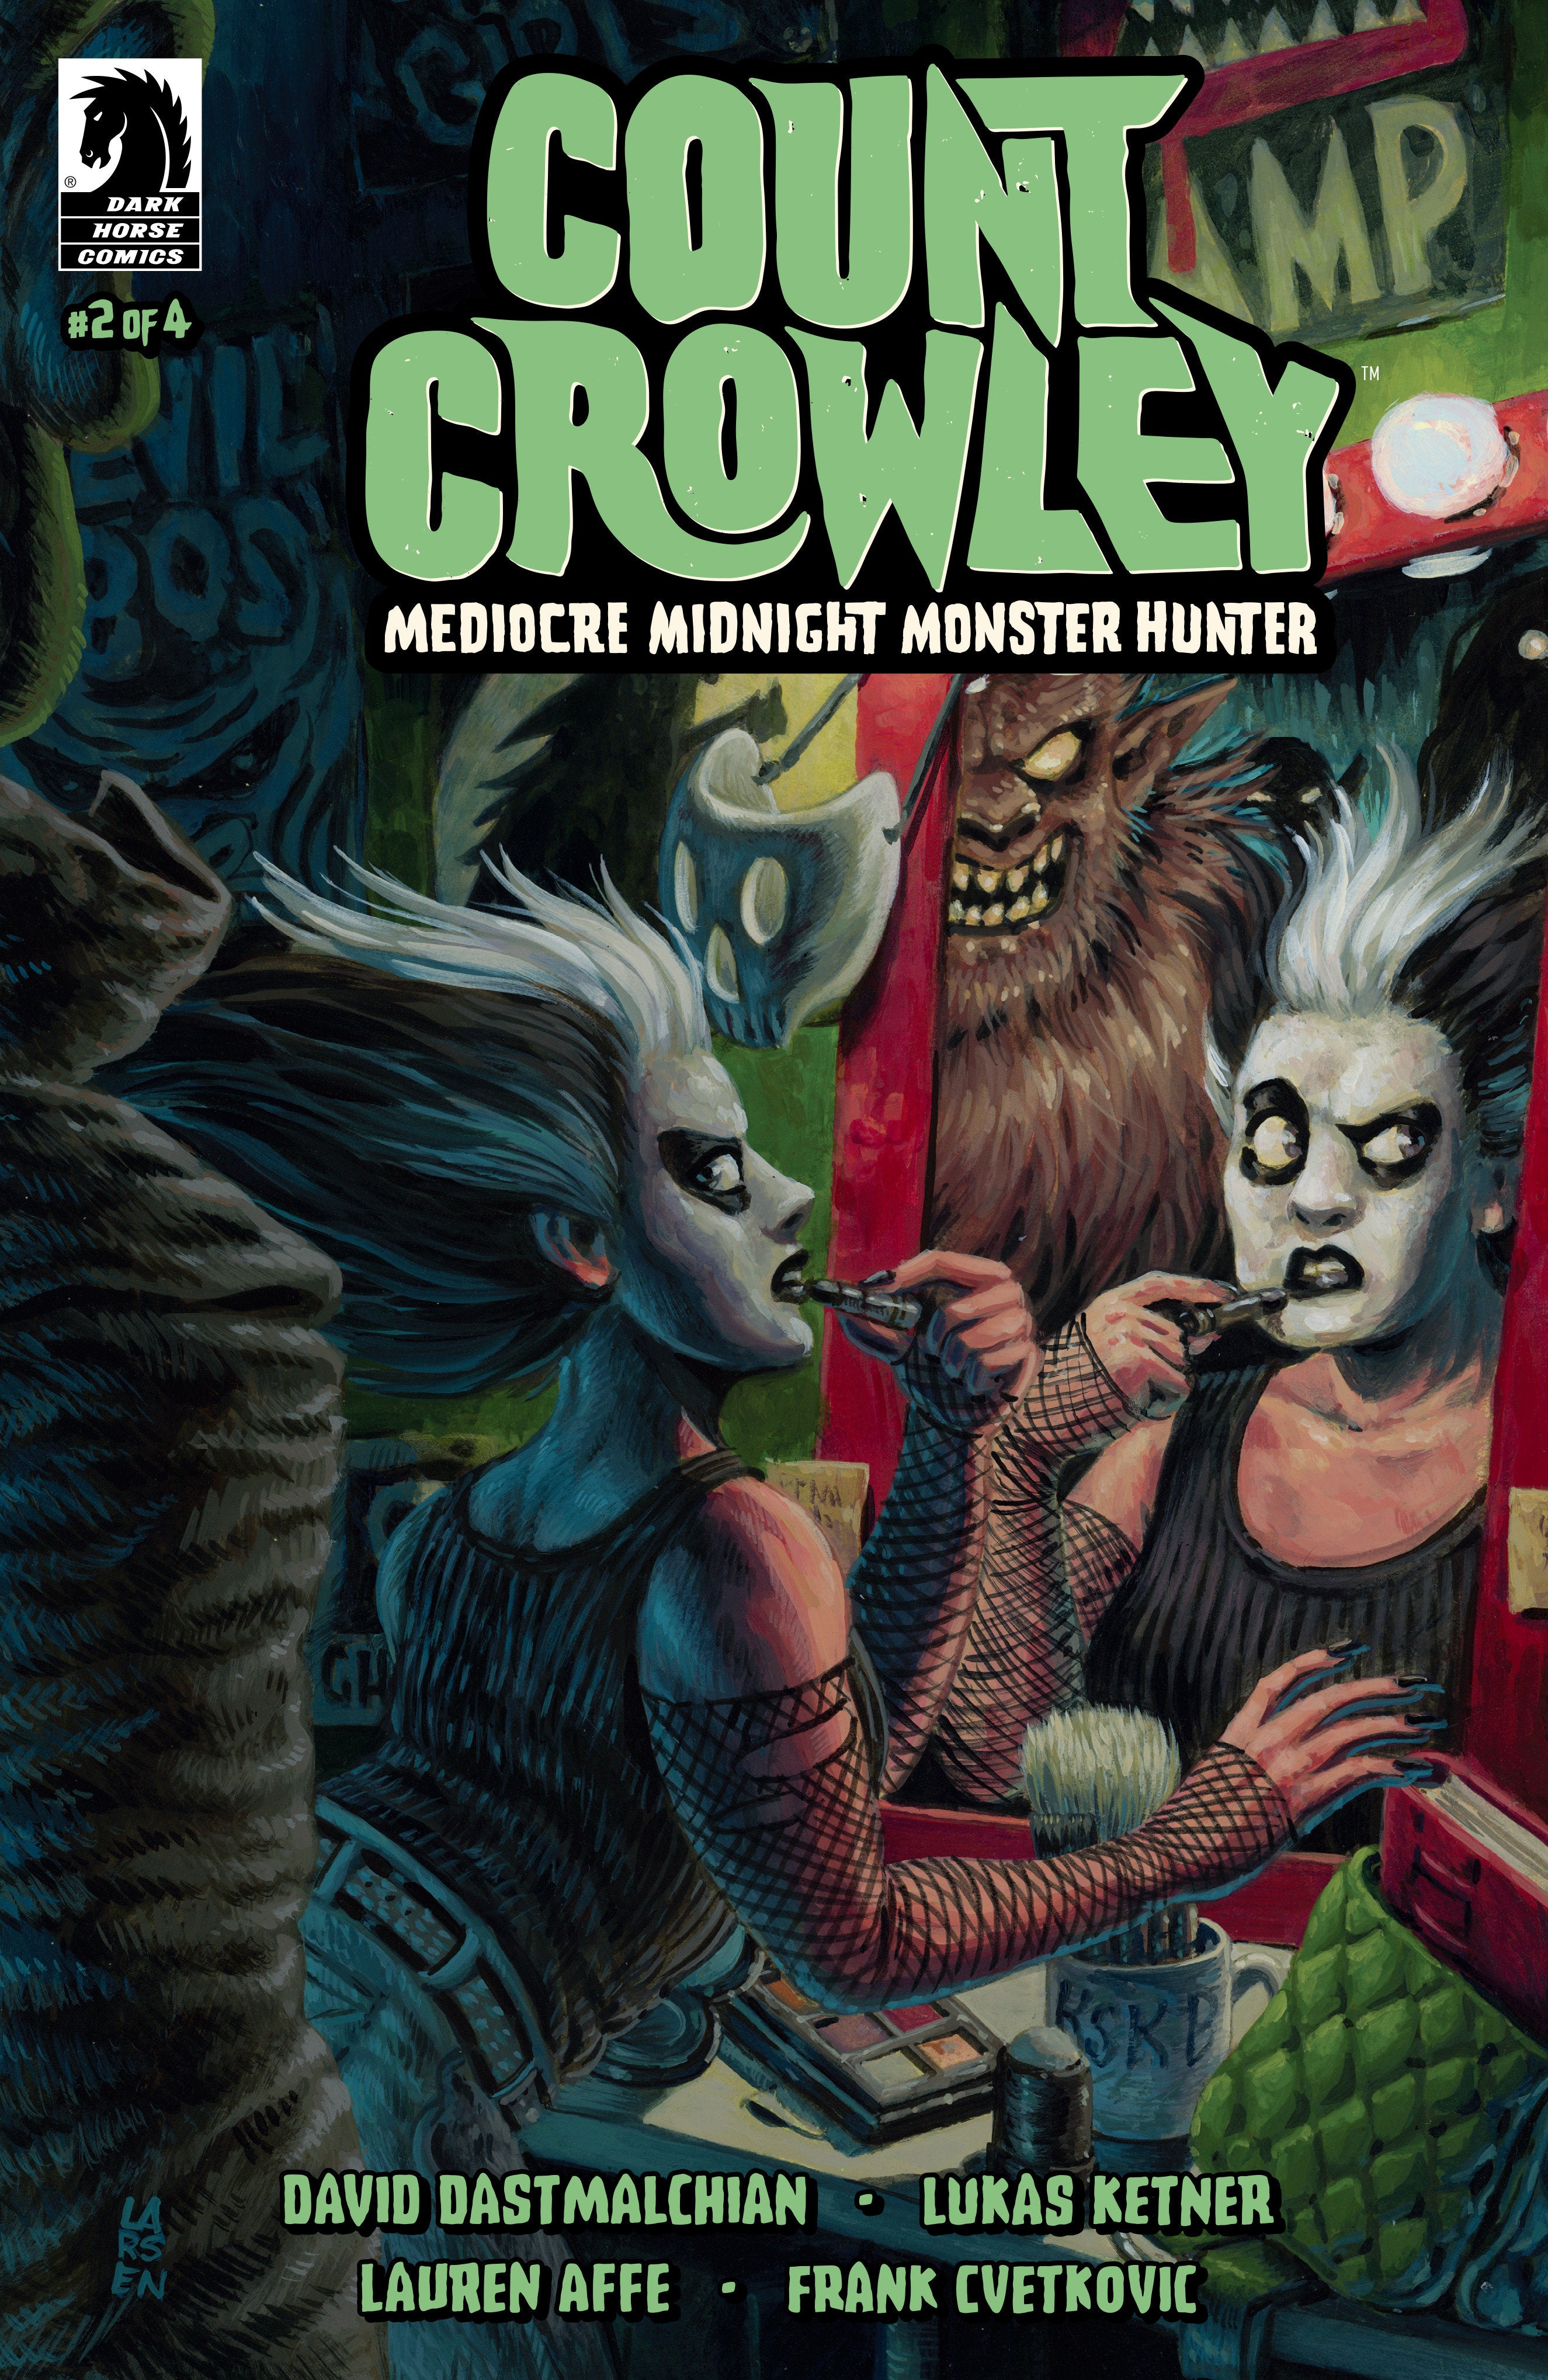 Count Crowley: Mediocre Midnight Monster Hunter #2 (Cover B) (Christine Larsen)